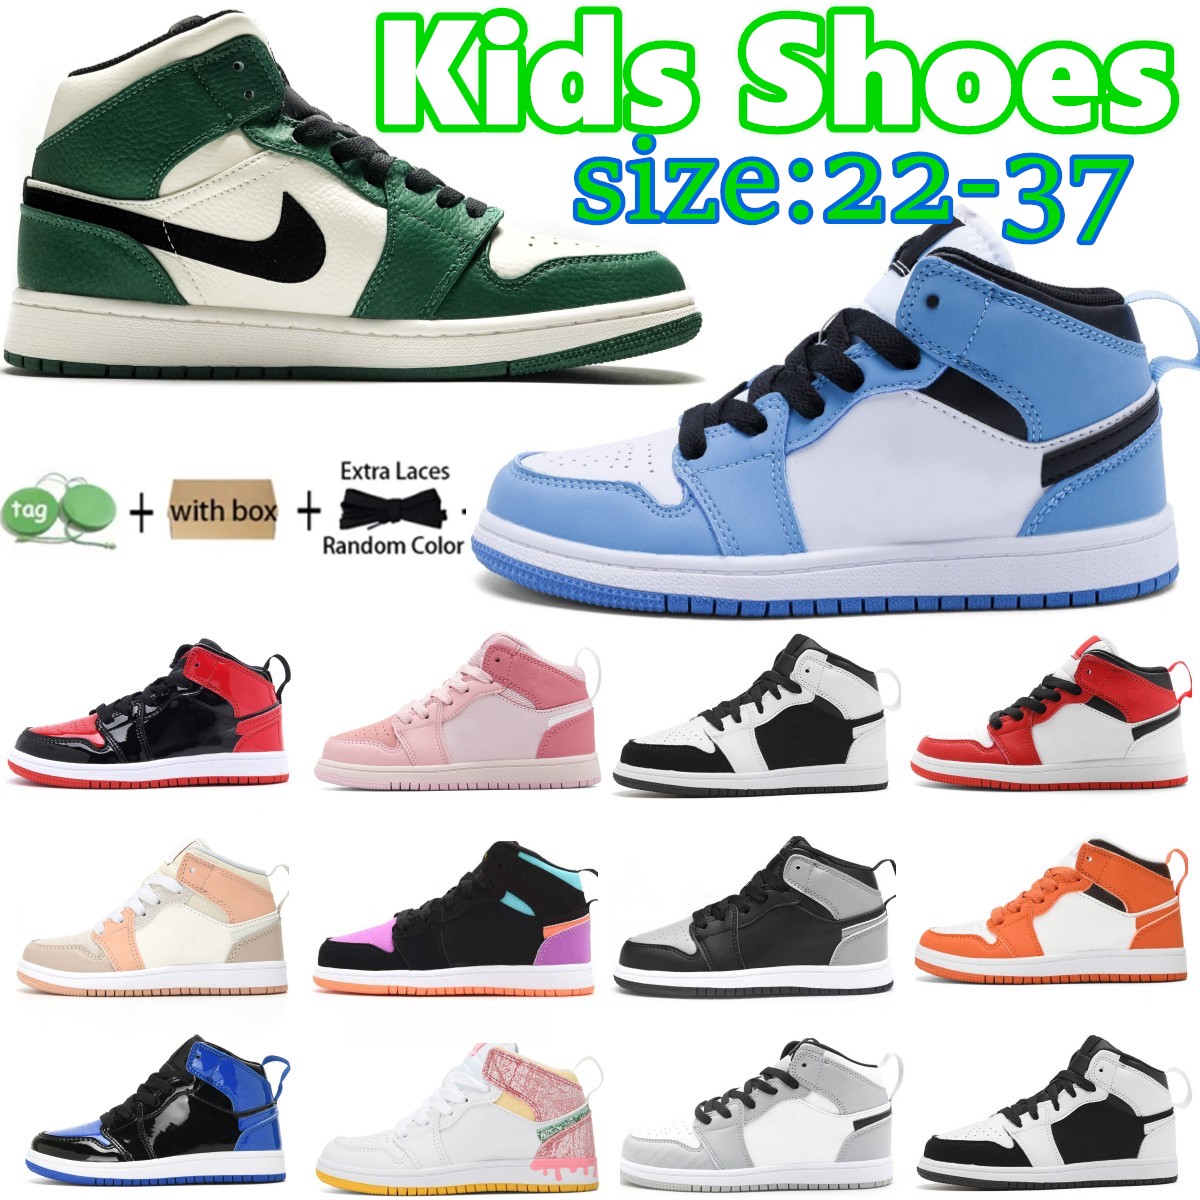 

1s Kids Shoes Jumpman 1 mid Toddlers boys girls youth basketball sneakers Chicago University Blue black white Patent Bred Green Children designer trainers baby shoe